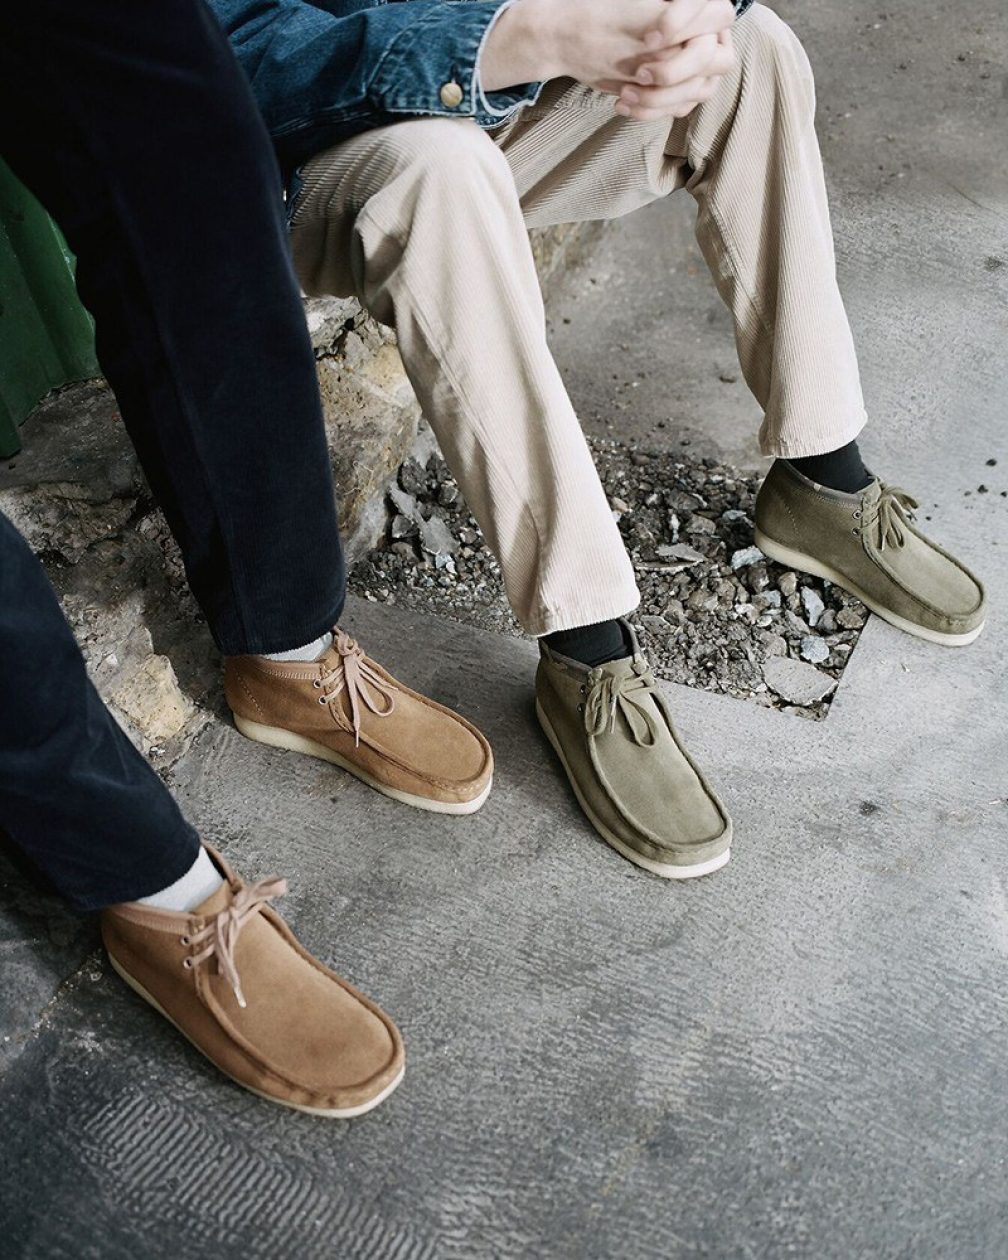 Carhartt WIP has collaborated with Clarks Originals to rework the